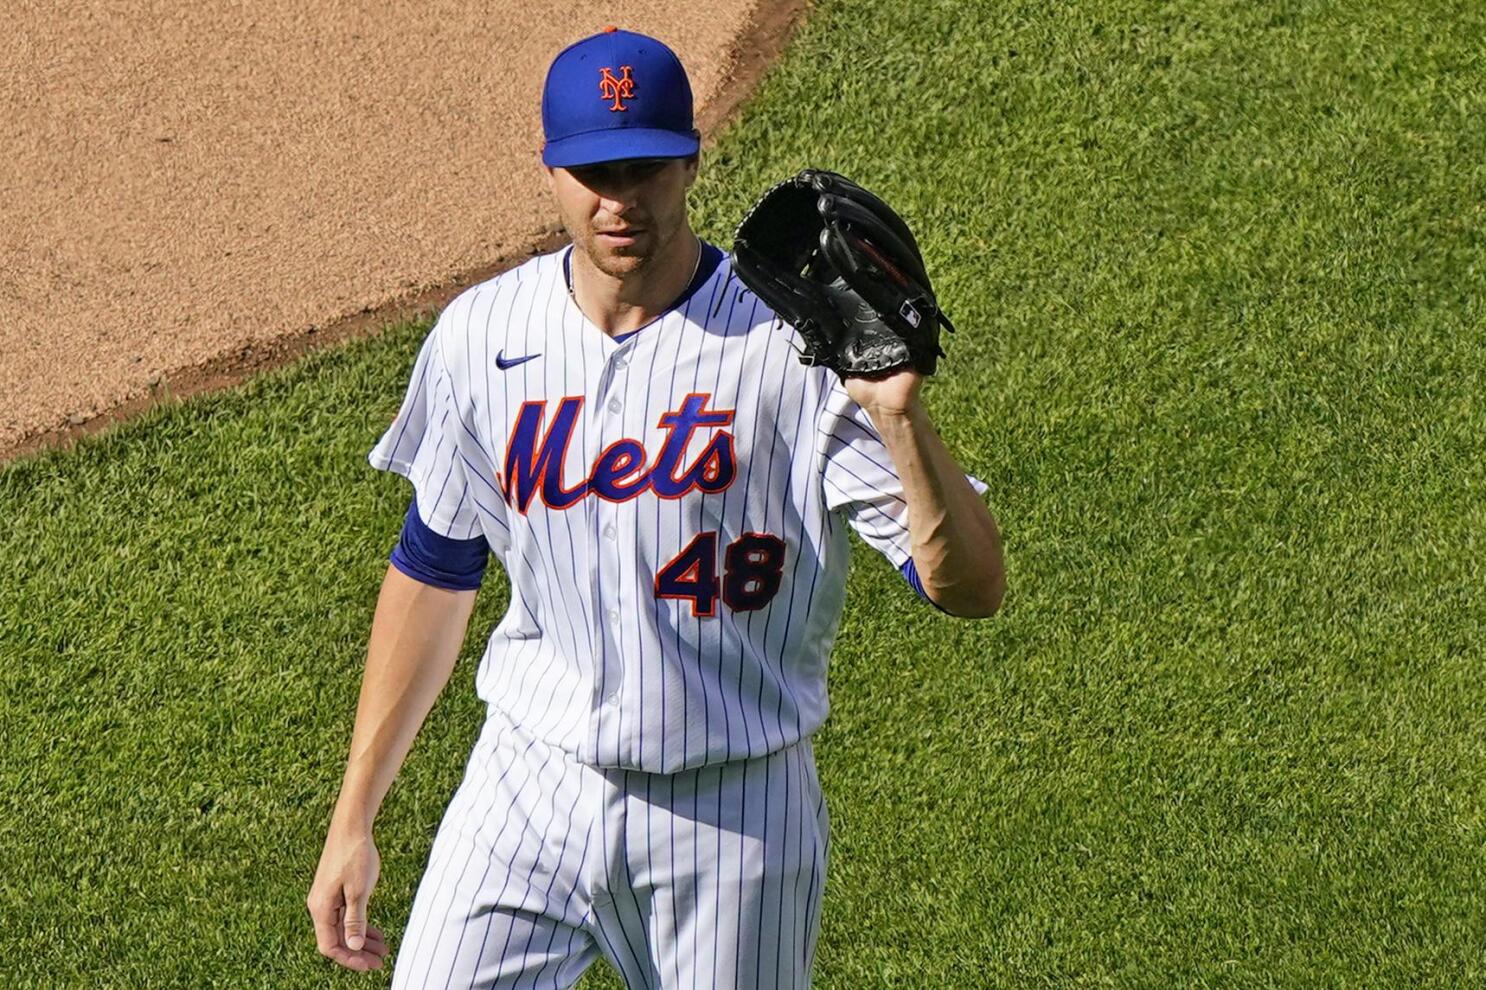 Jacob deGrom allows one hit in Mets win over Braves